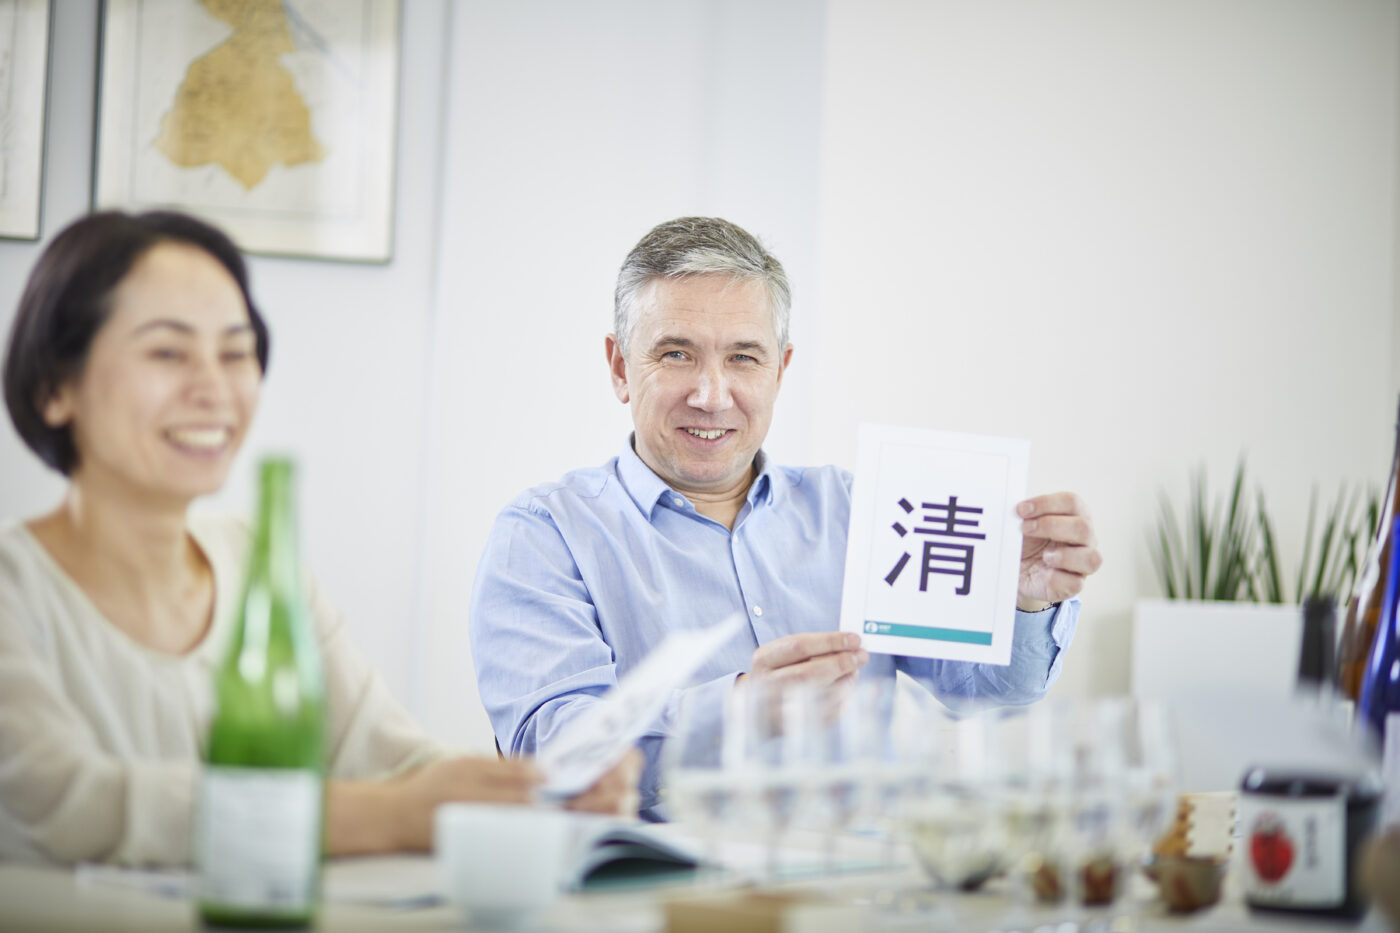 Man and woman in a sake class. The man is holding up a kanji sign.